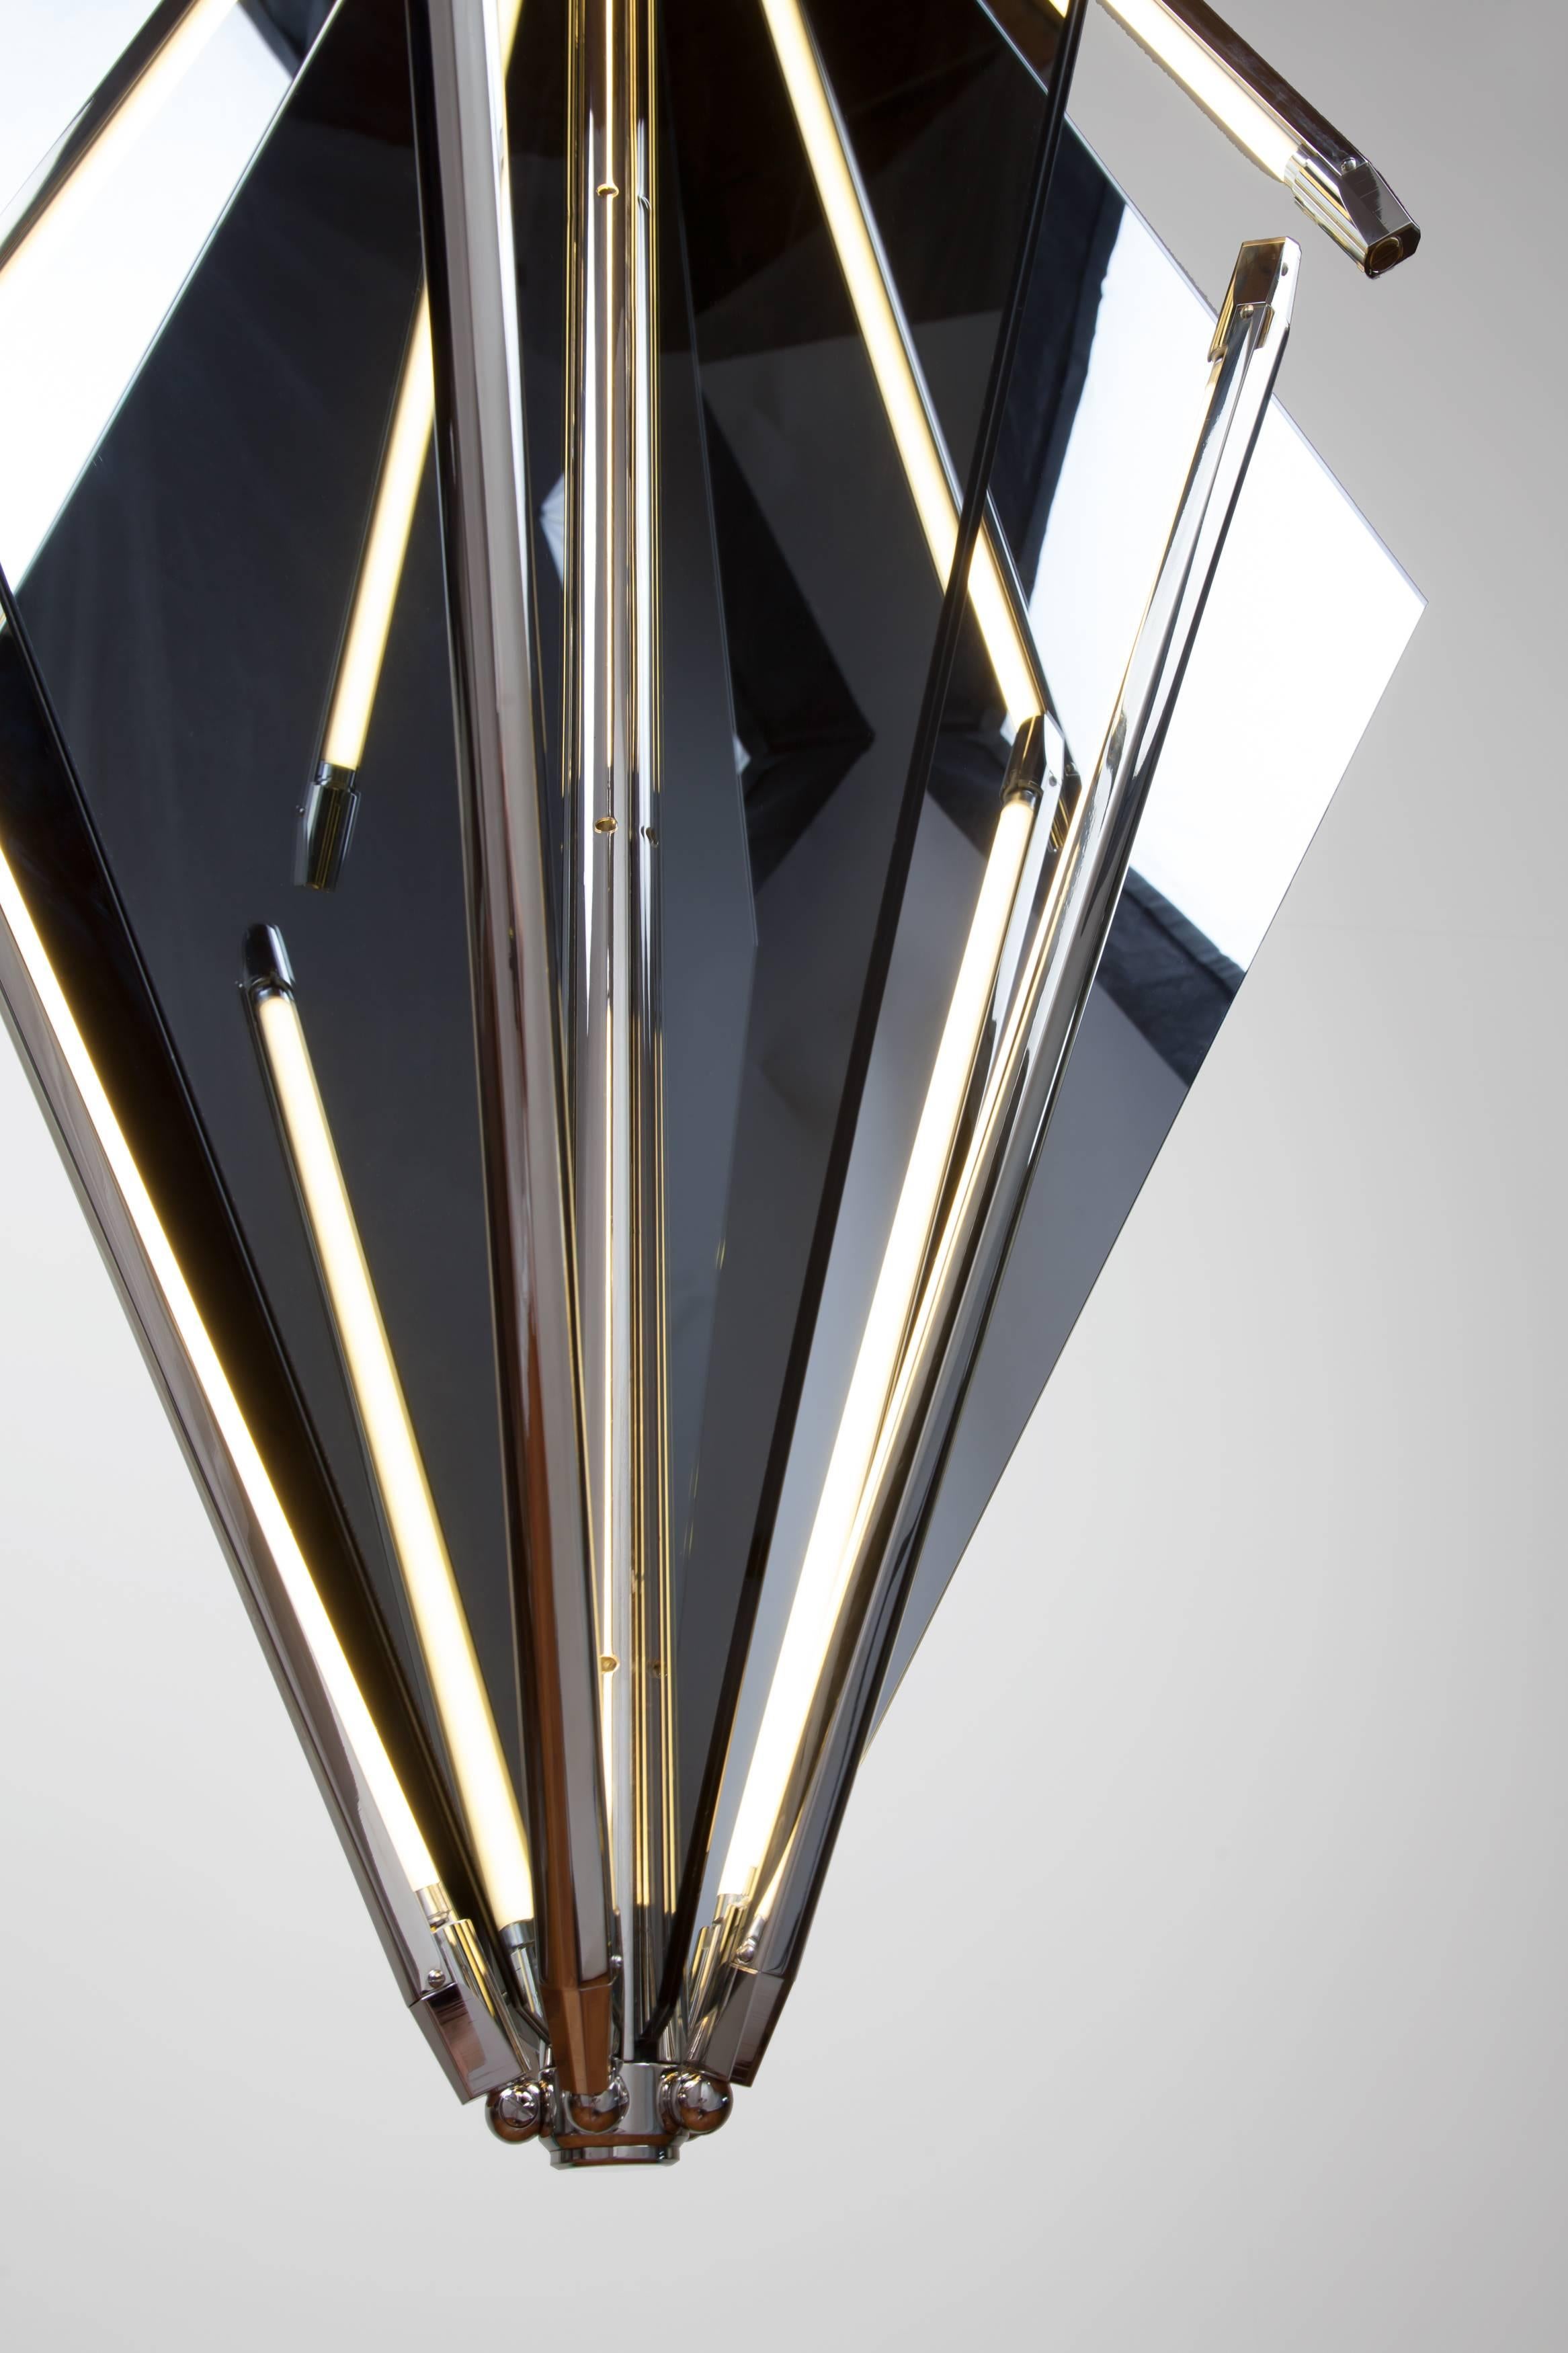 Echo uses fins of mirror radiating from a central axis to reflect beams of light. LED tubes are turned inward to bounce off the glass the light becomes both softened and multiplied. Also available with fins of glass which diffuse the light and